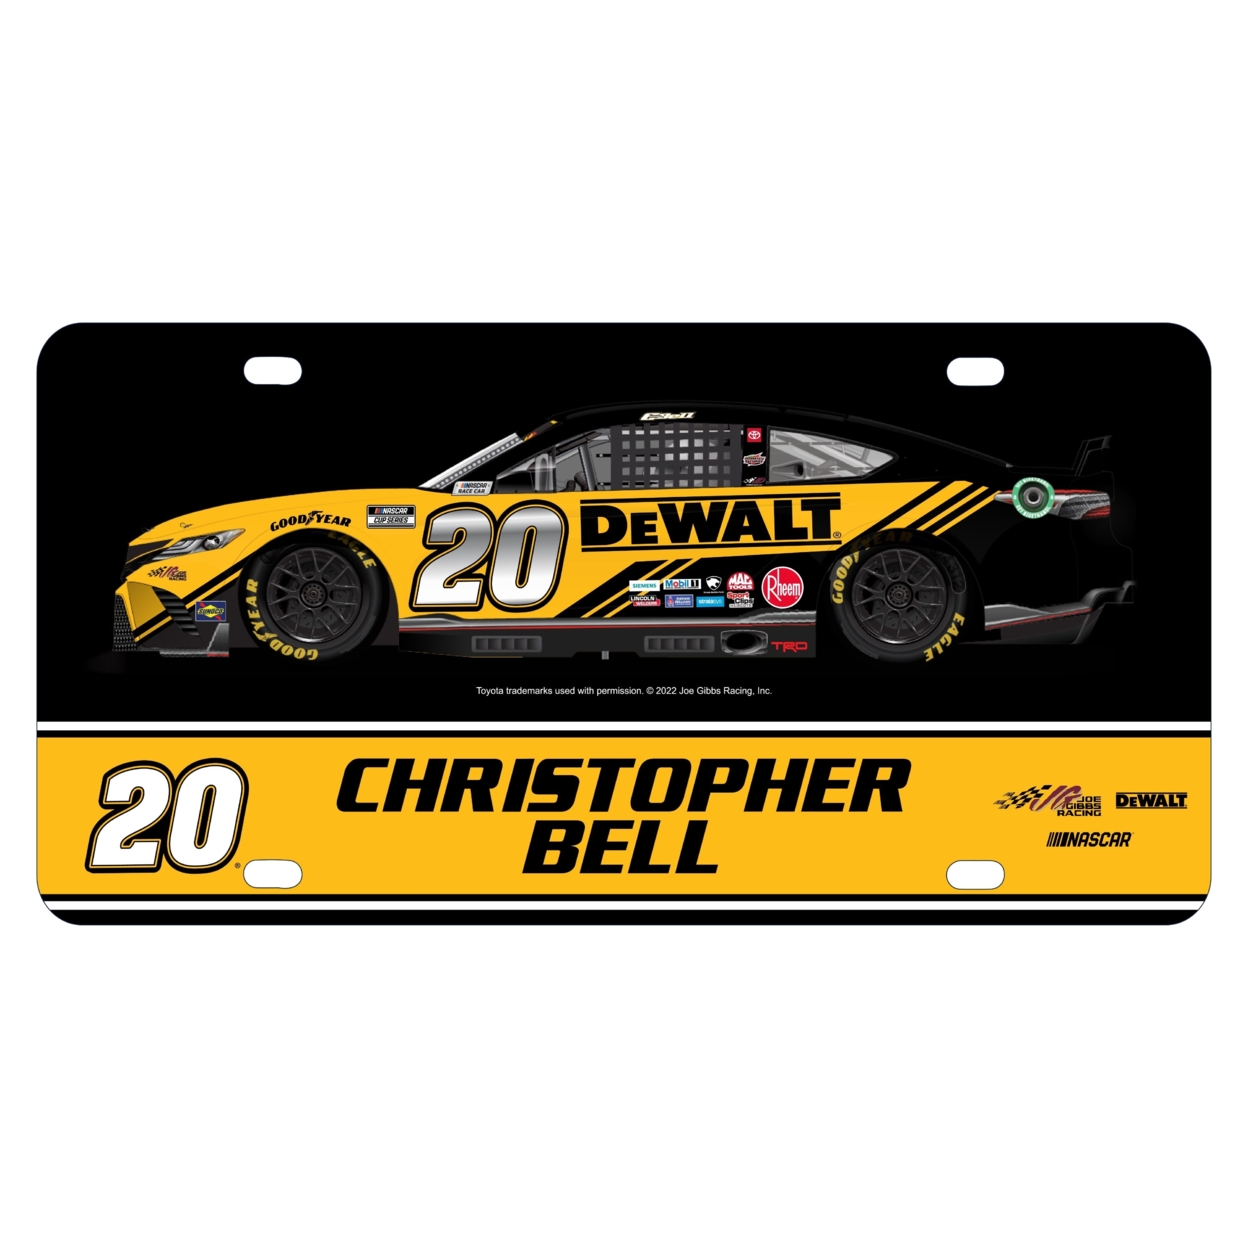 #20 Christopher Bell Officially Licensed NASCAR License Plate